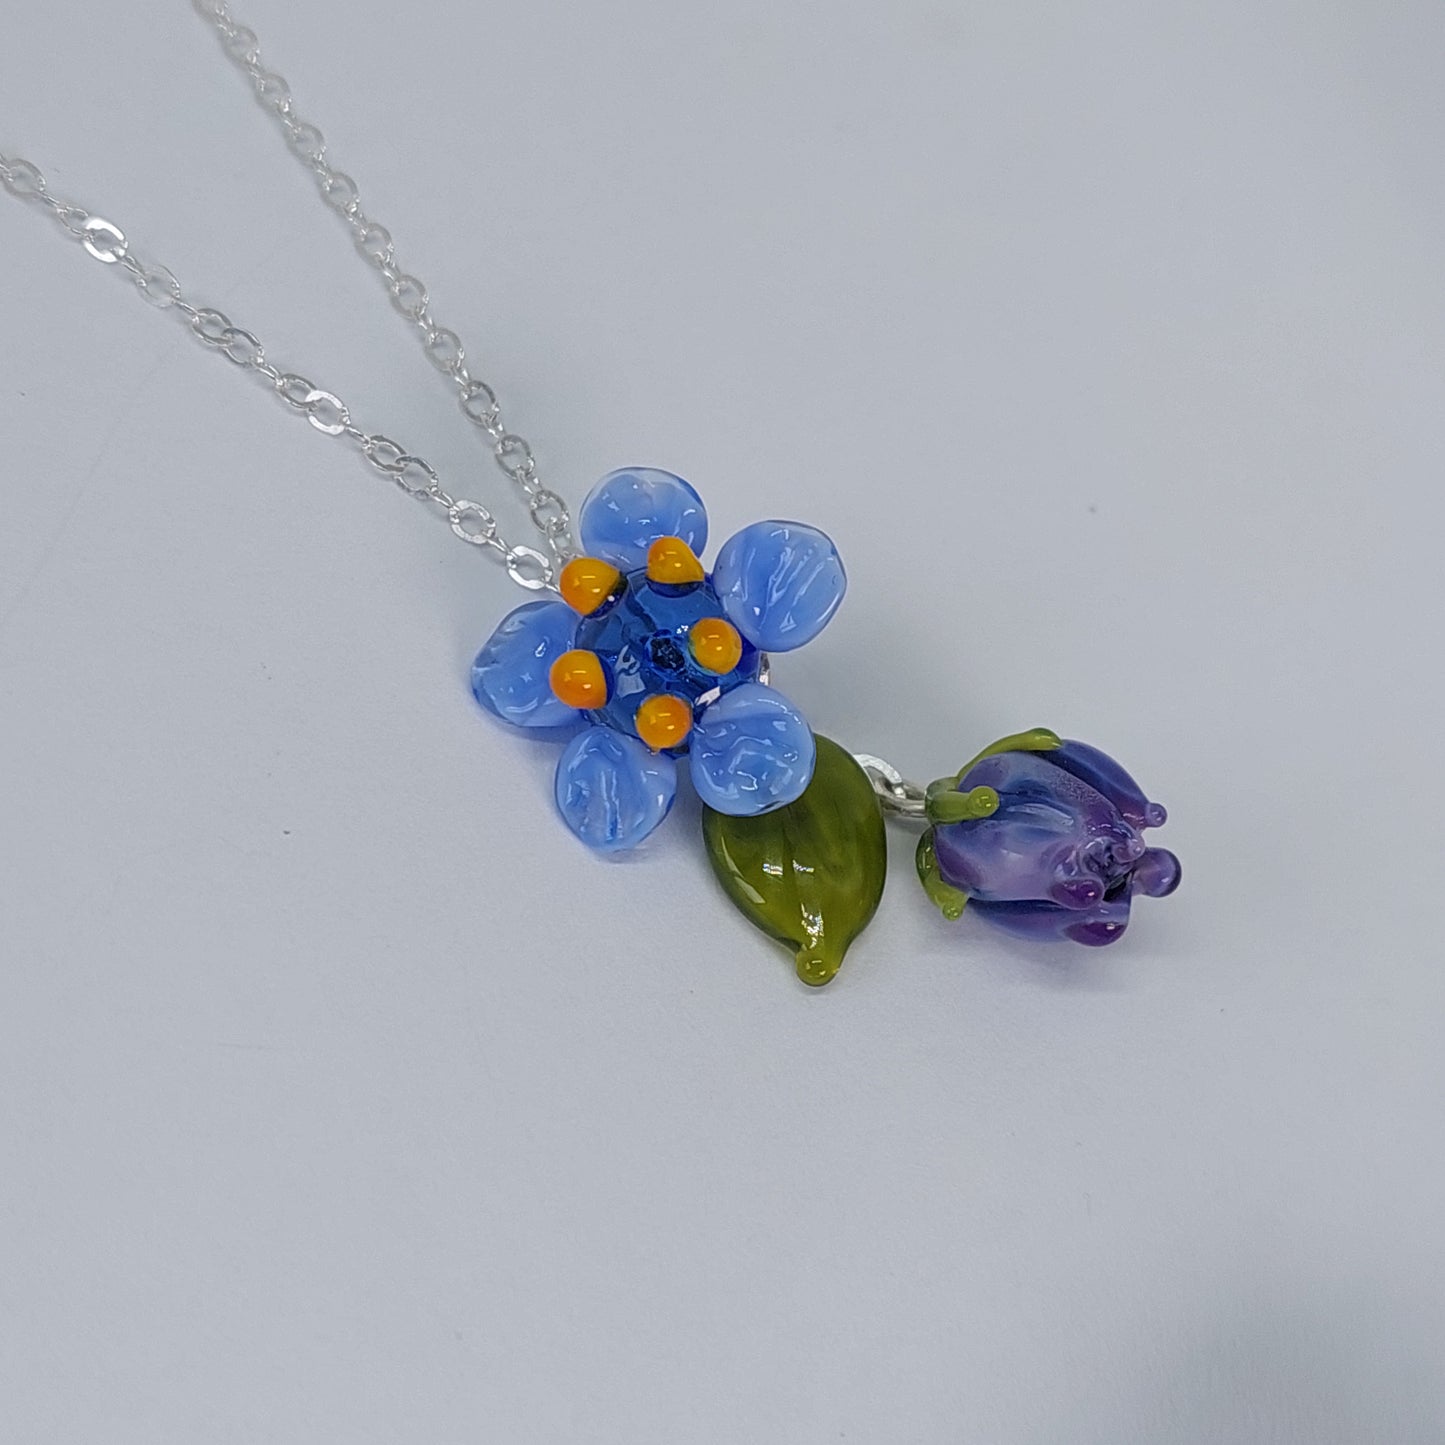 NEW!! Glass Art Forget Me Not Drop Pendant